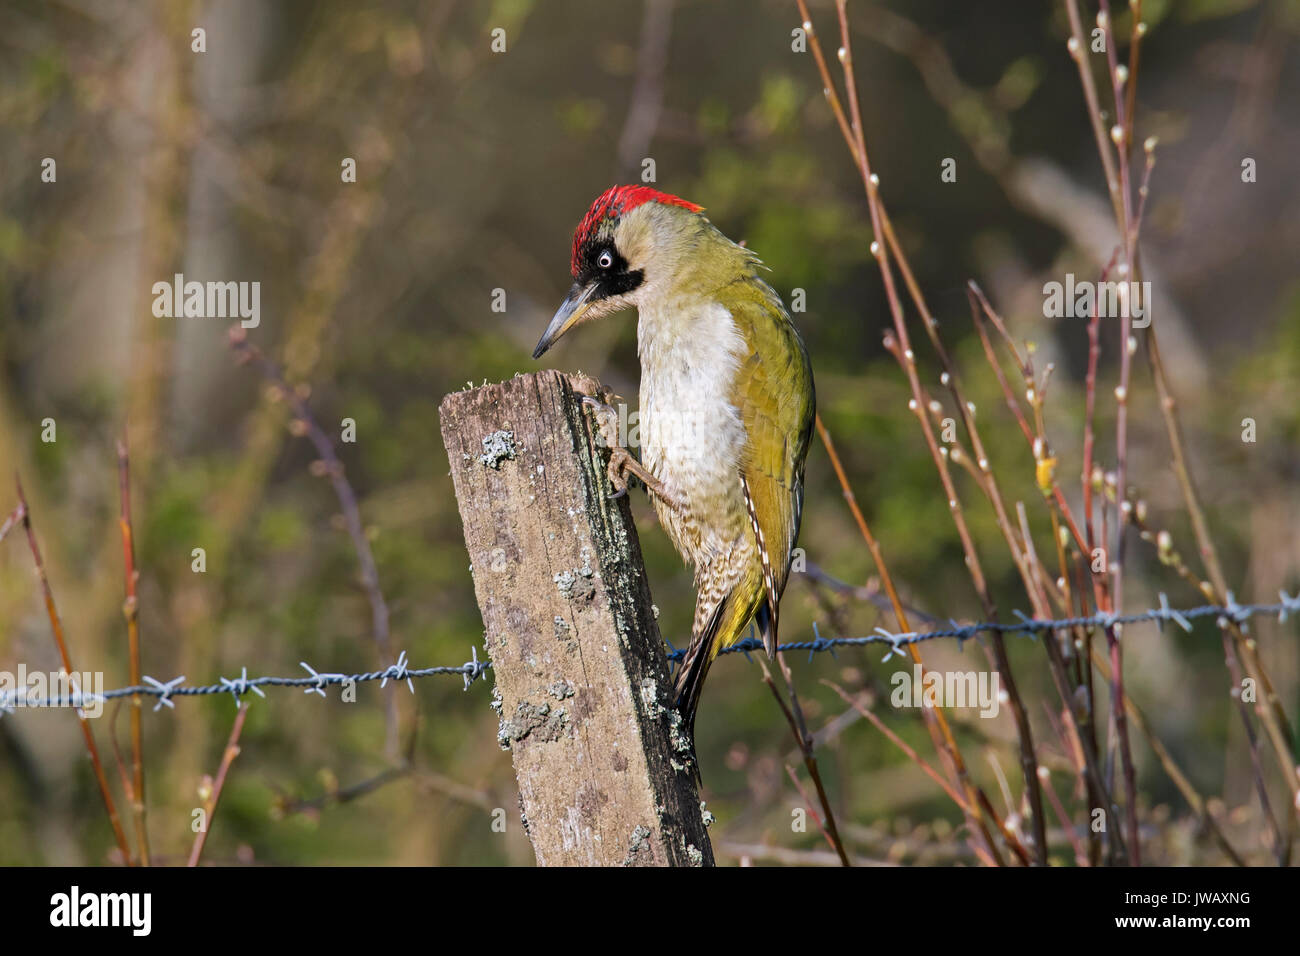 European green woodpecker (Picus viridis) female perched on old wooden fence post Stock Photo